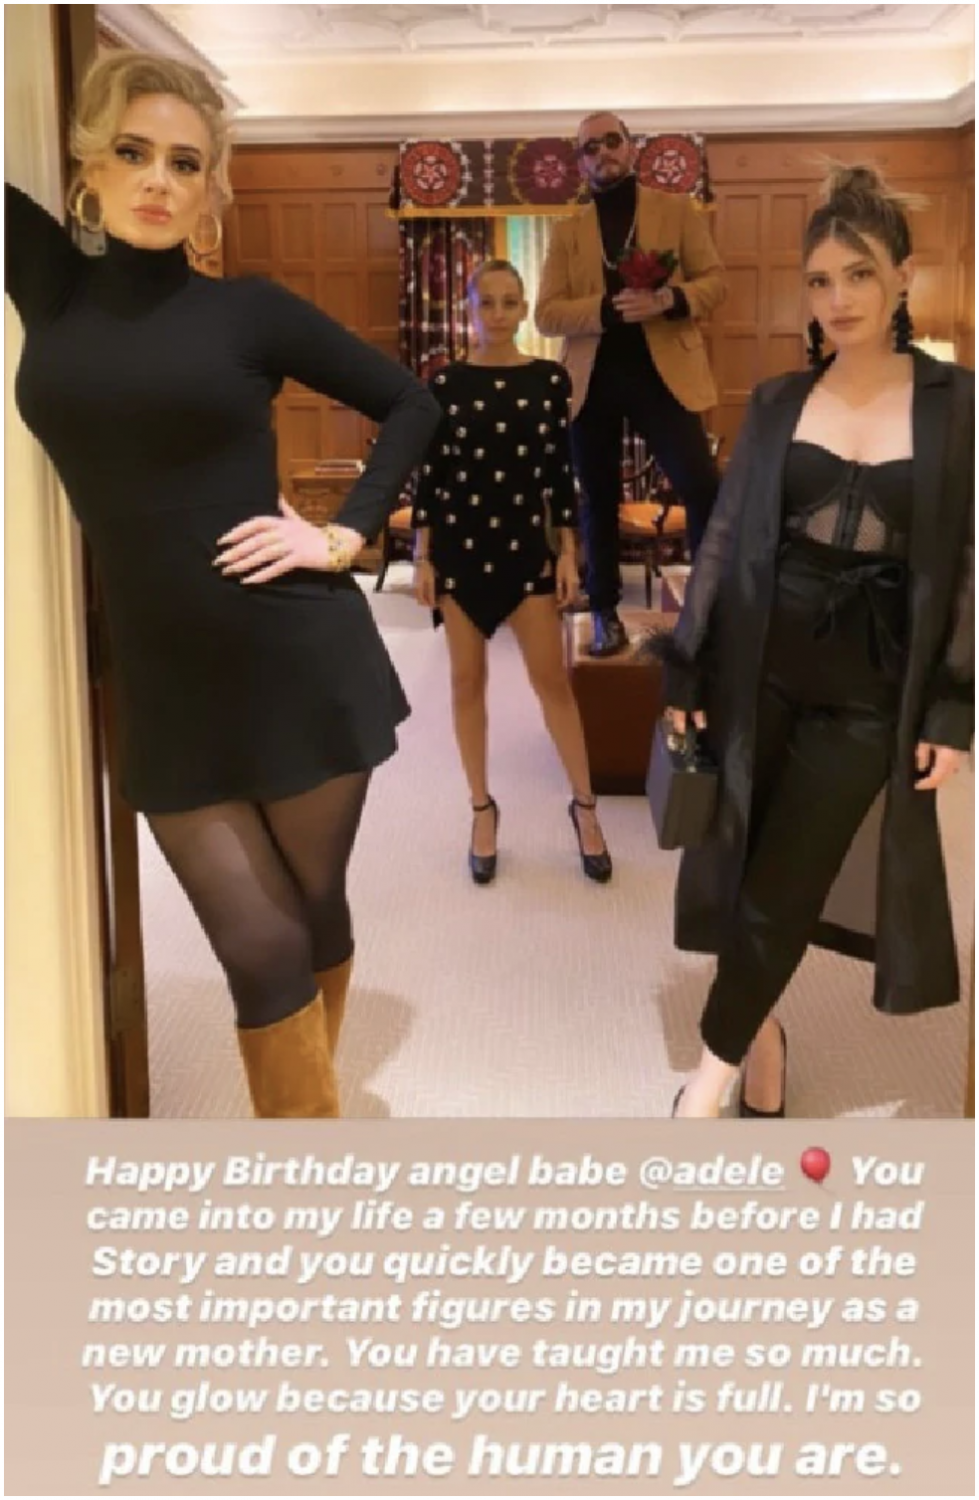  Adele recently celebrated her birthday. Picture: InstagramSource:Instagram